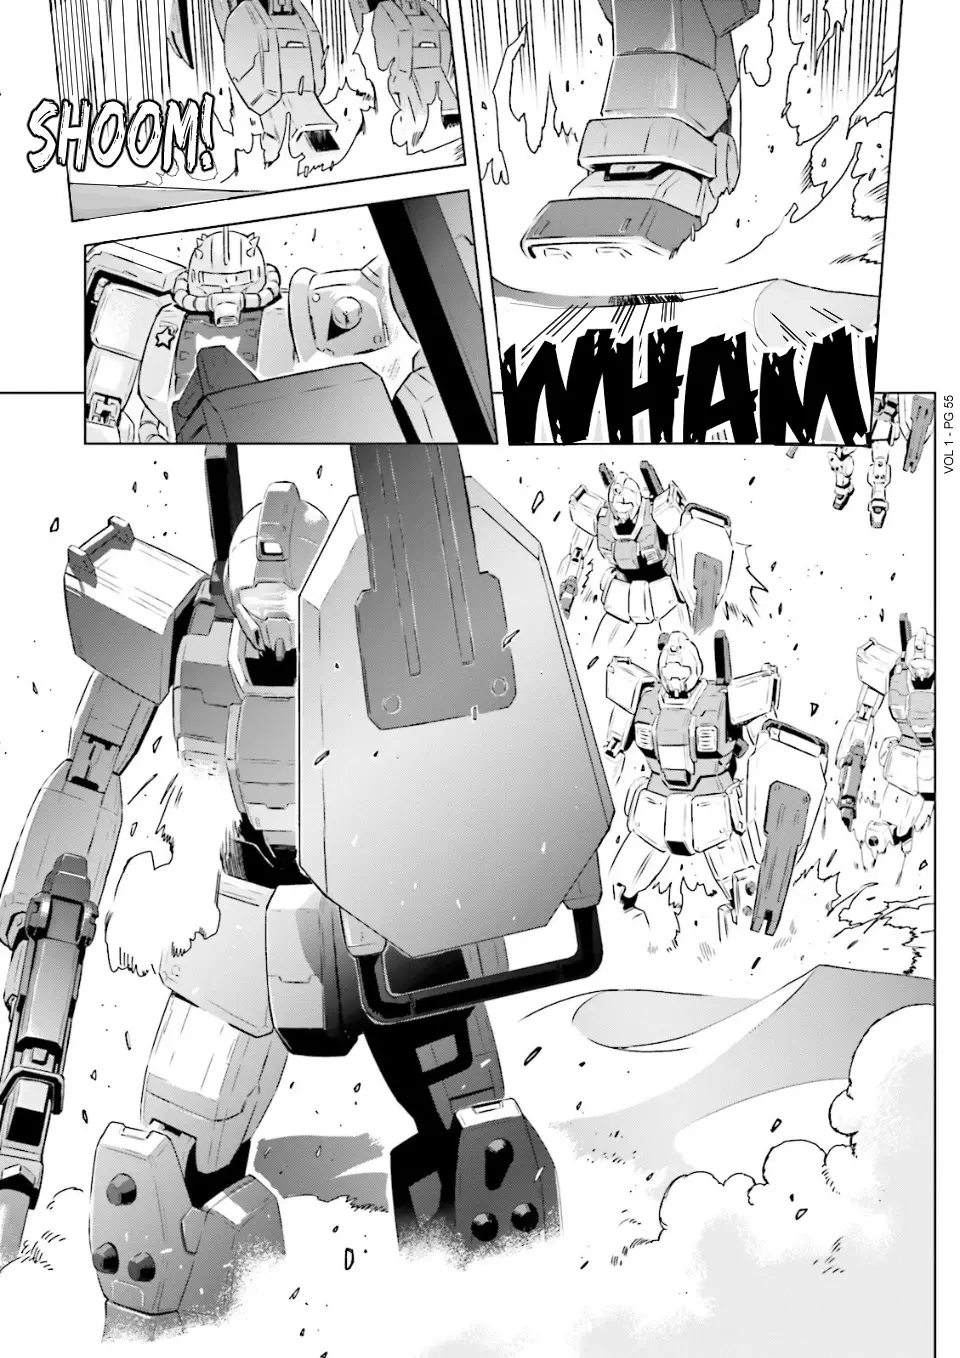 Mobile Suit Gundam Side Story - Missing Link - 2 page 17-772d4e32